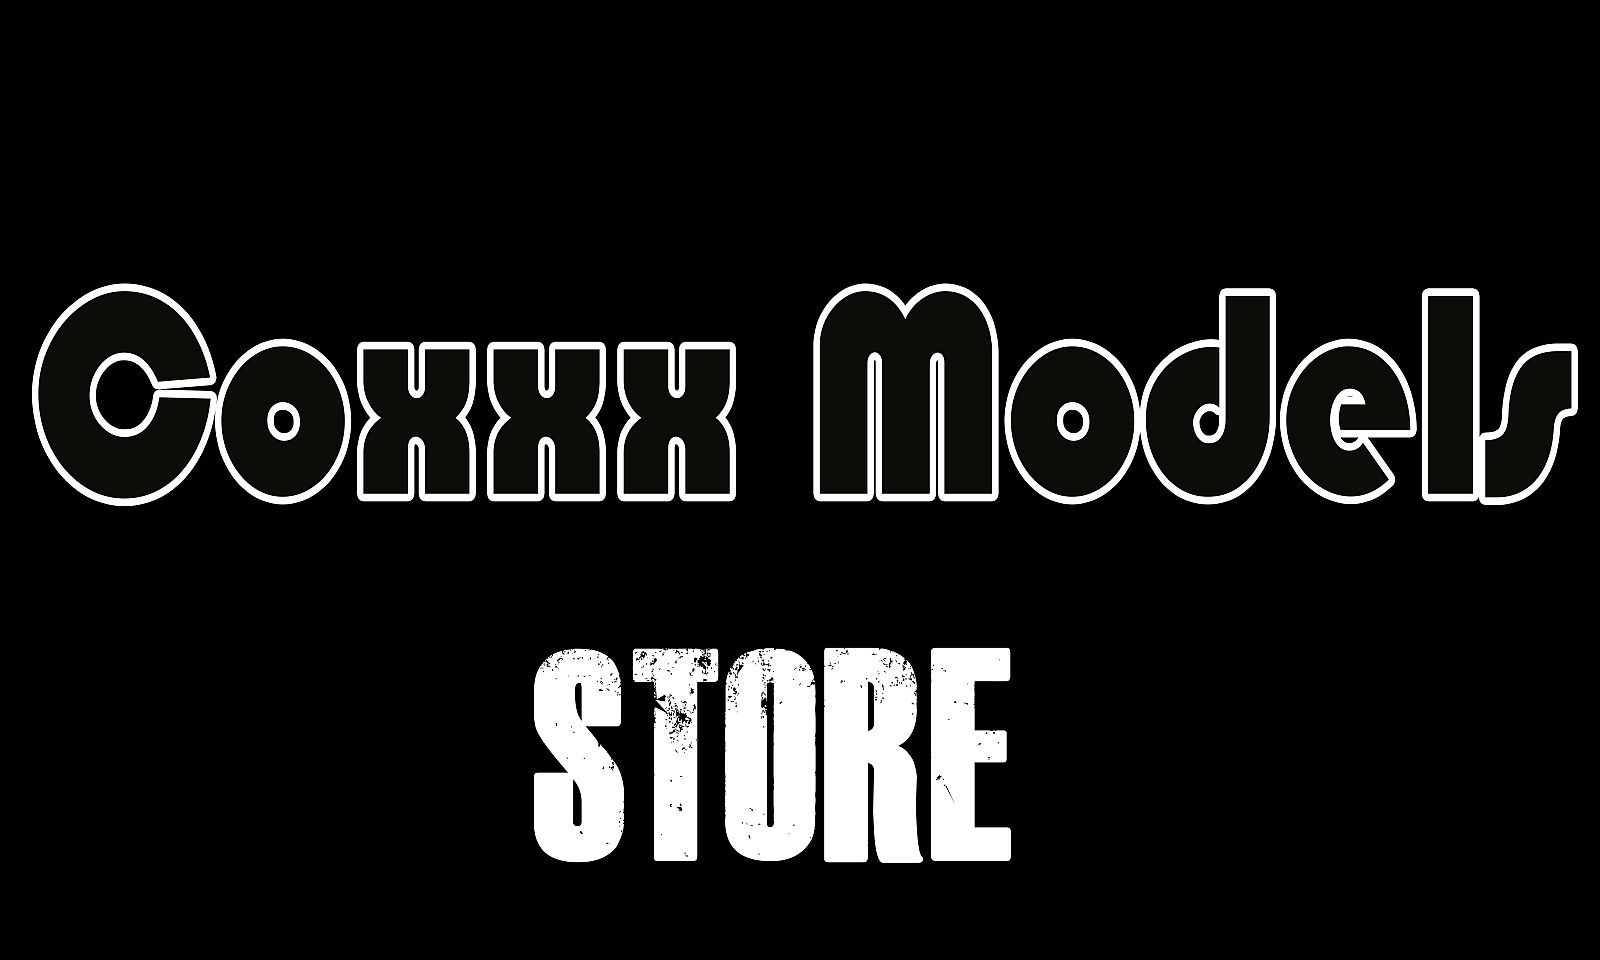 Coxxx Models' Brand New Online Store Packs in the Pleasure